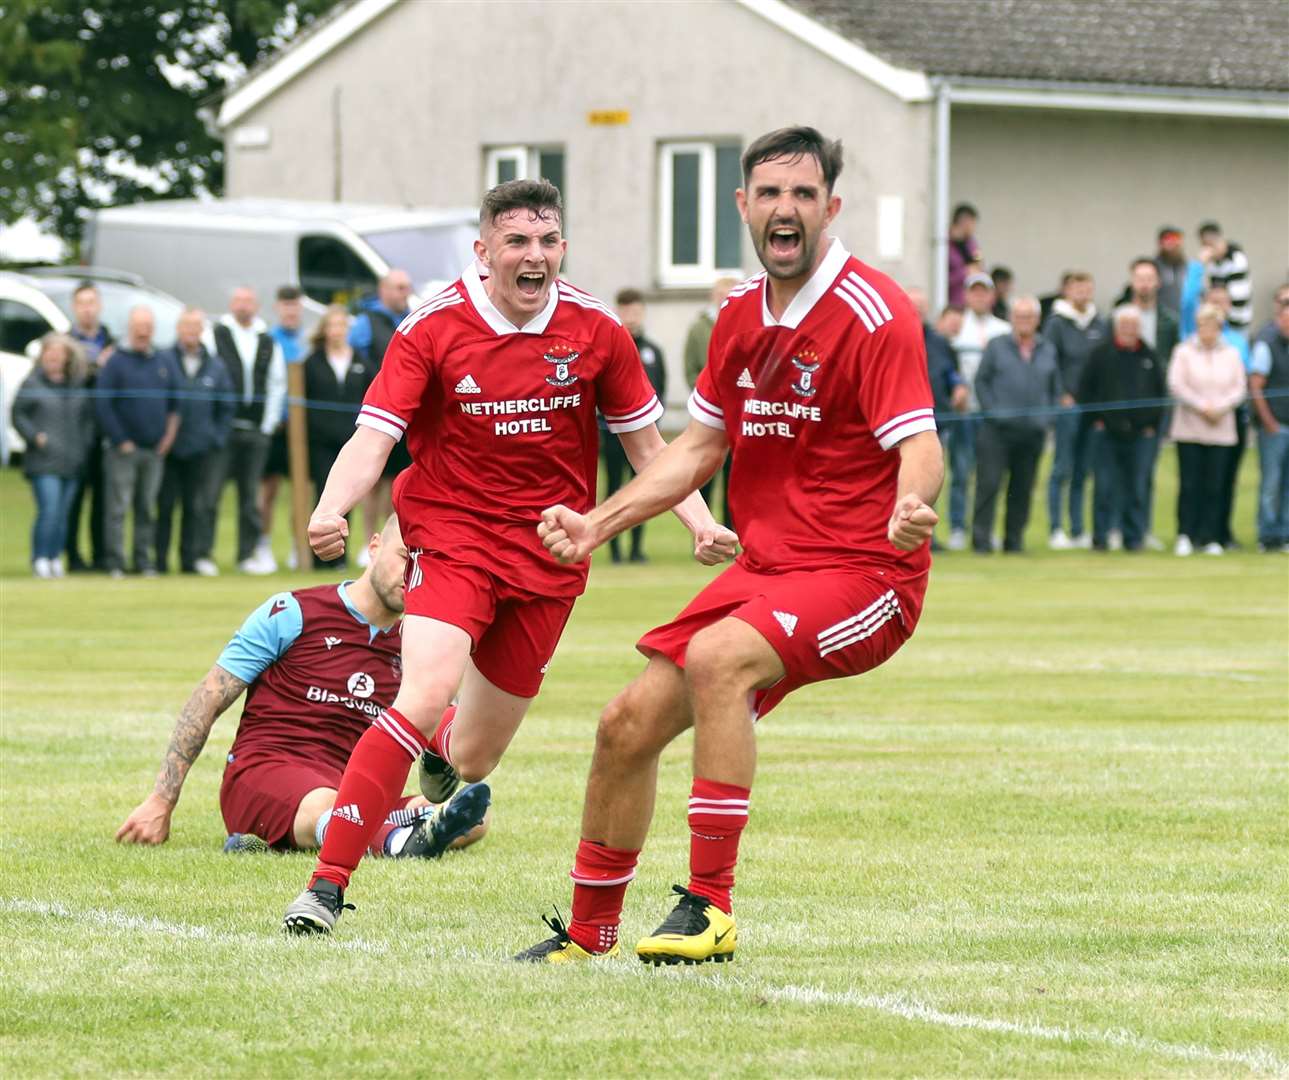 Alan Mathieson (left) celebrates with Graham MacNab after scoring the equaliser for Wick Groats in Saturday's Eain Mackintosh Cup final against Pentland United in Halkirk. The Stabbies ran out 3-1 winners. Picture: James Gunn